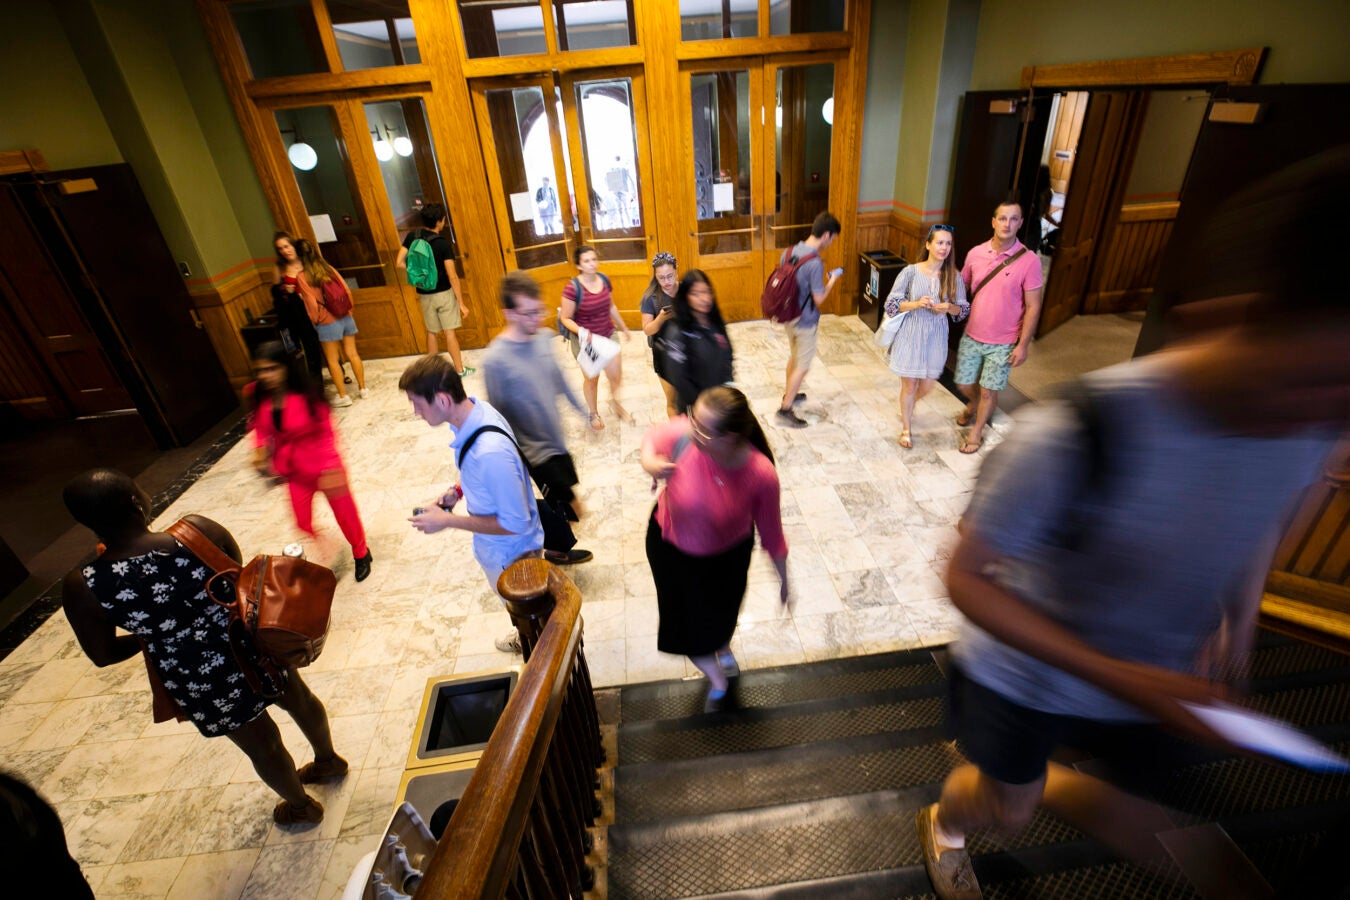 Students walk around the entrance to Sever Hall.